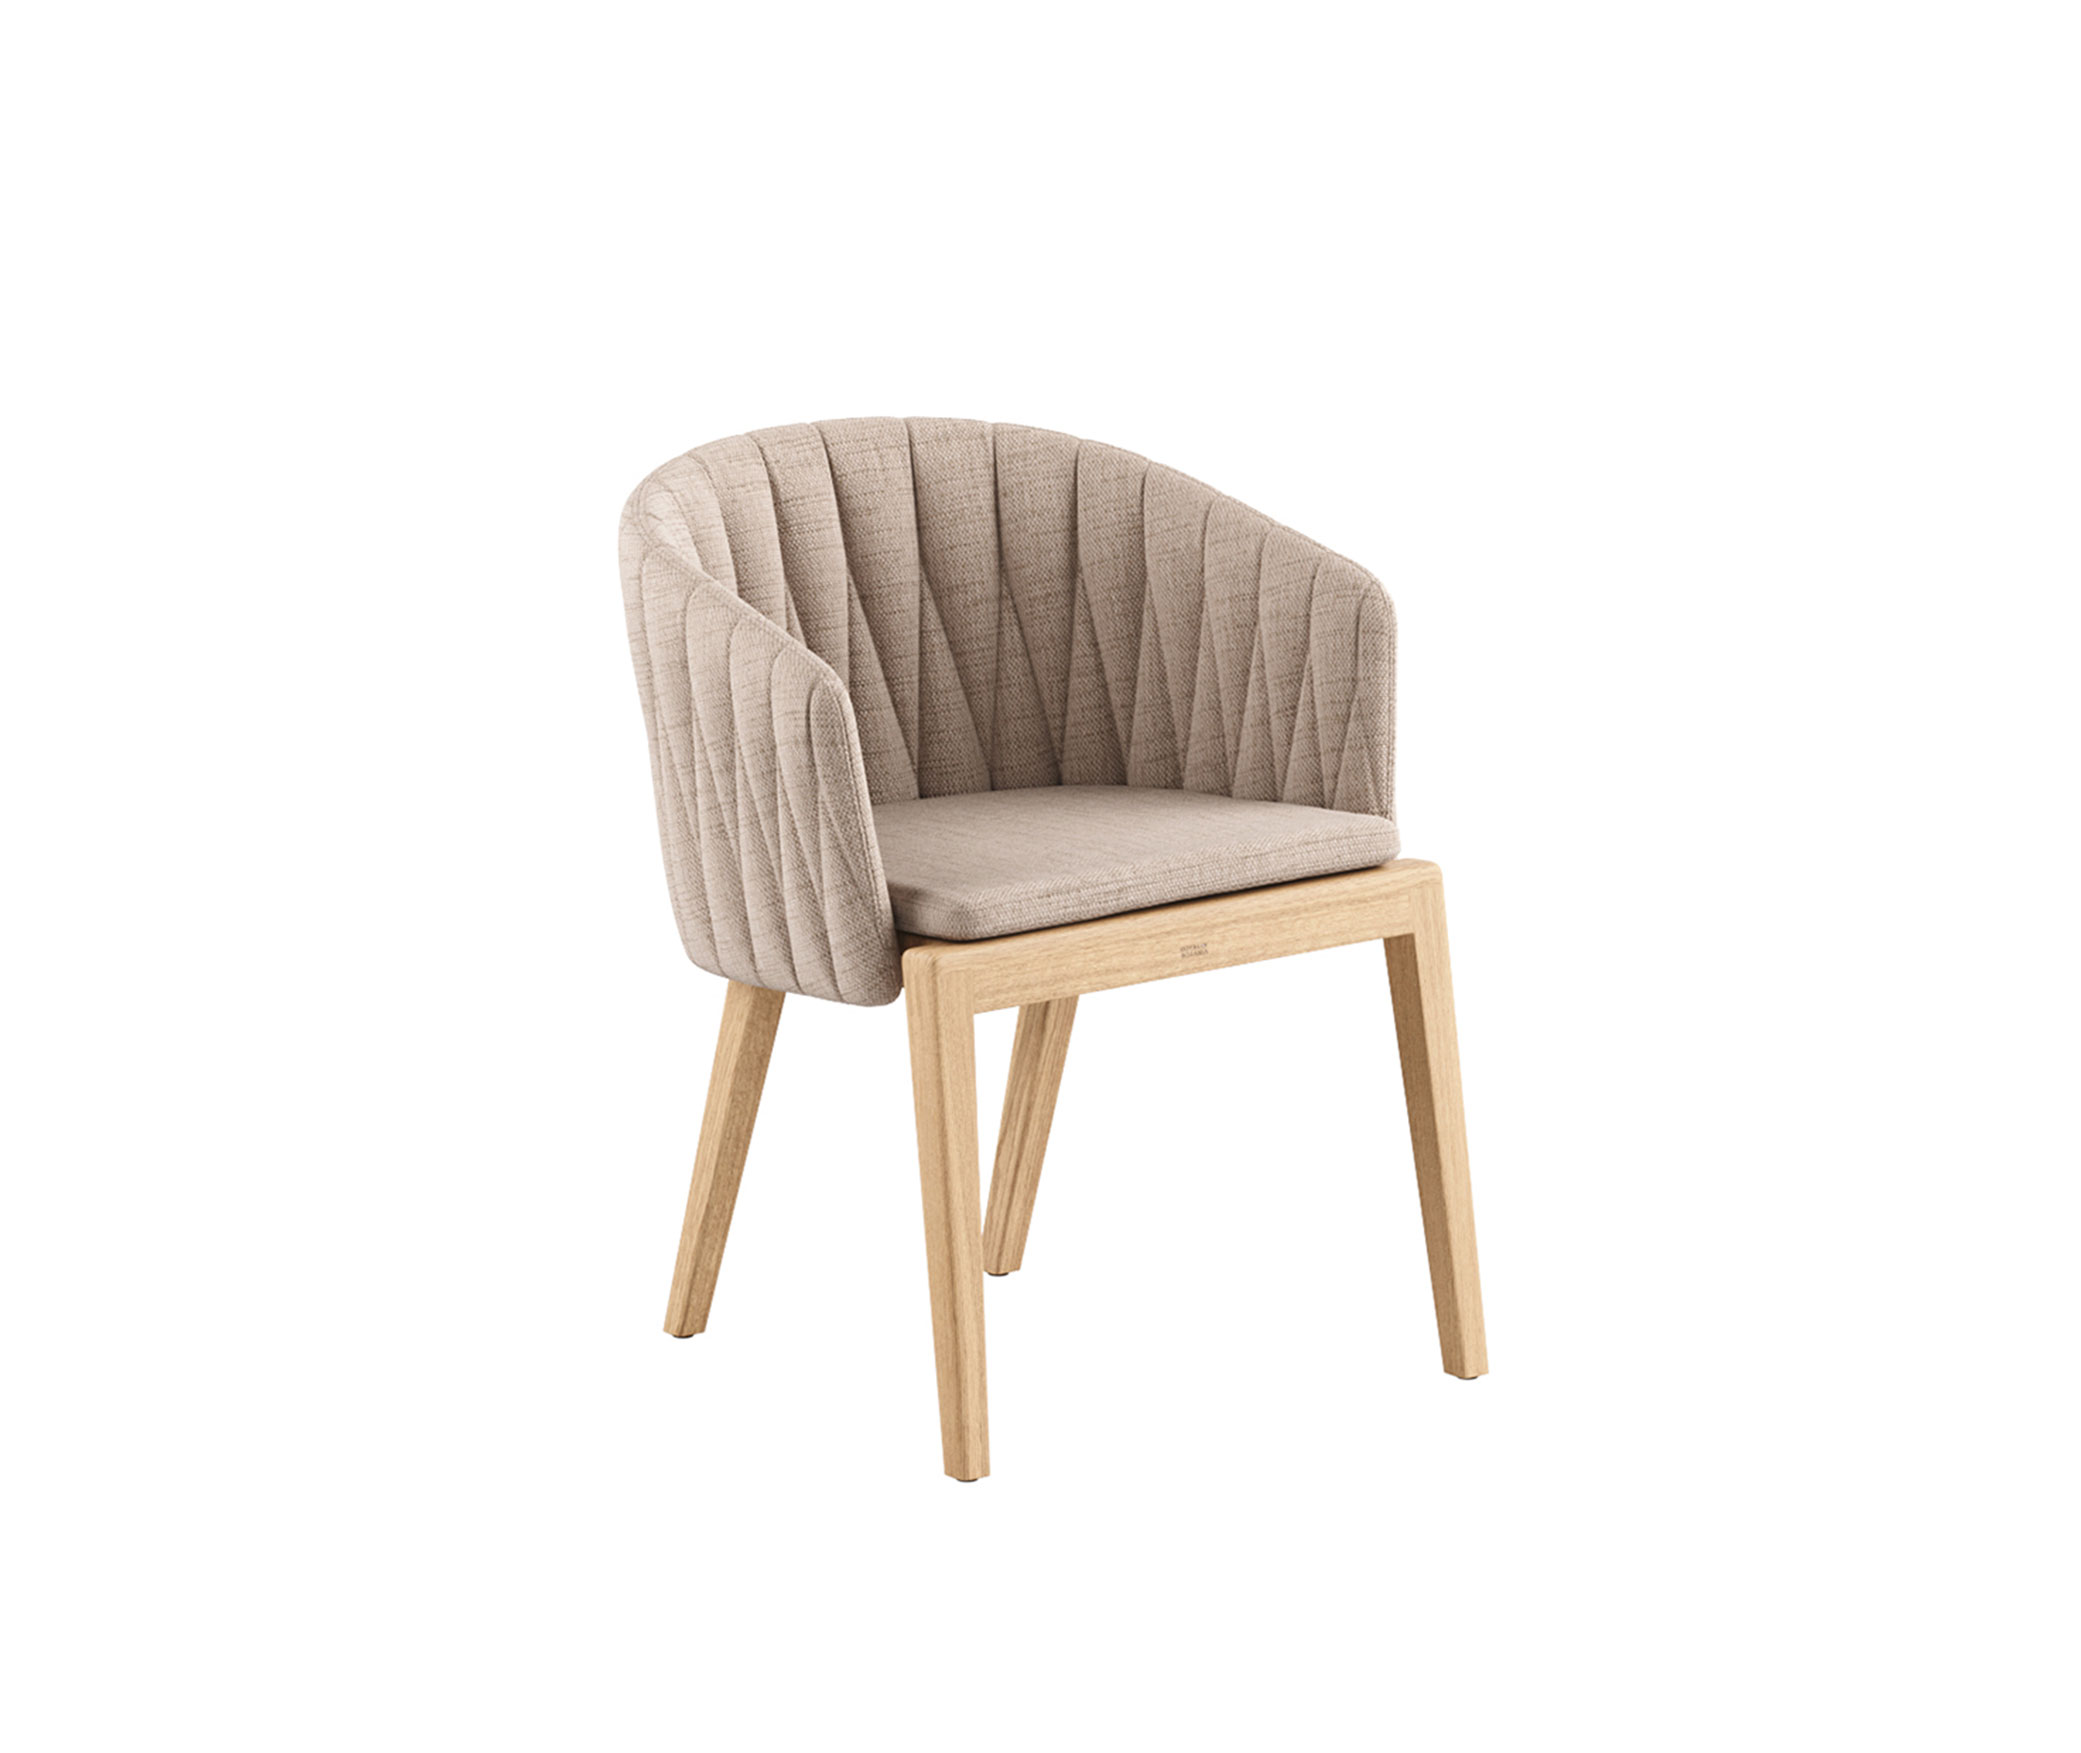 Royal-Botania_Calypso-Chair-Upholstered-Back_int_products